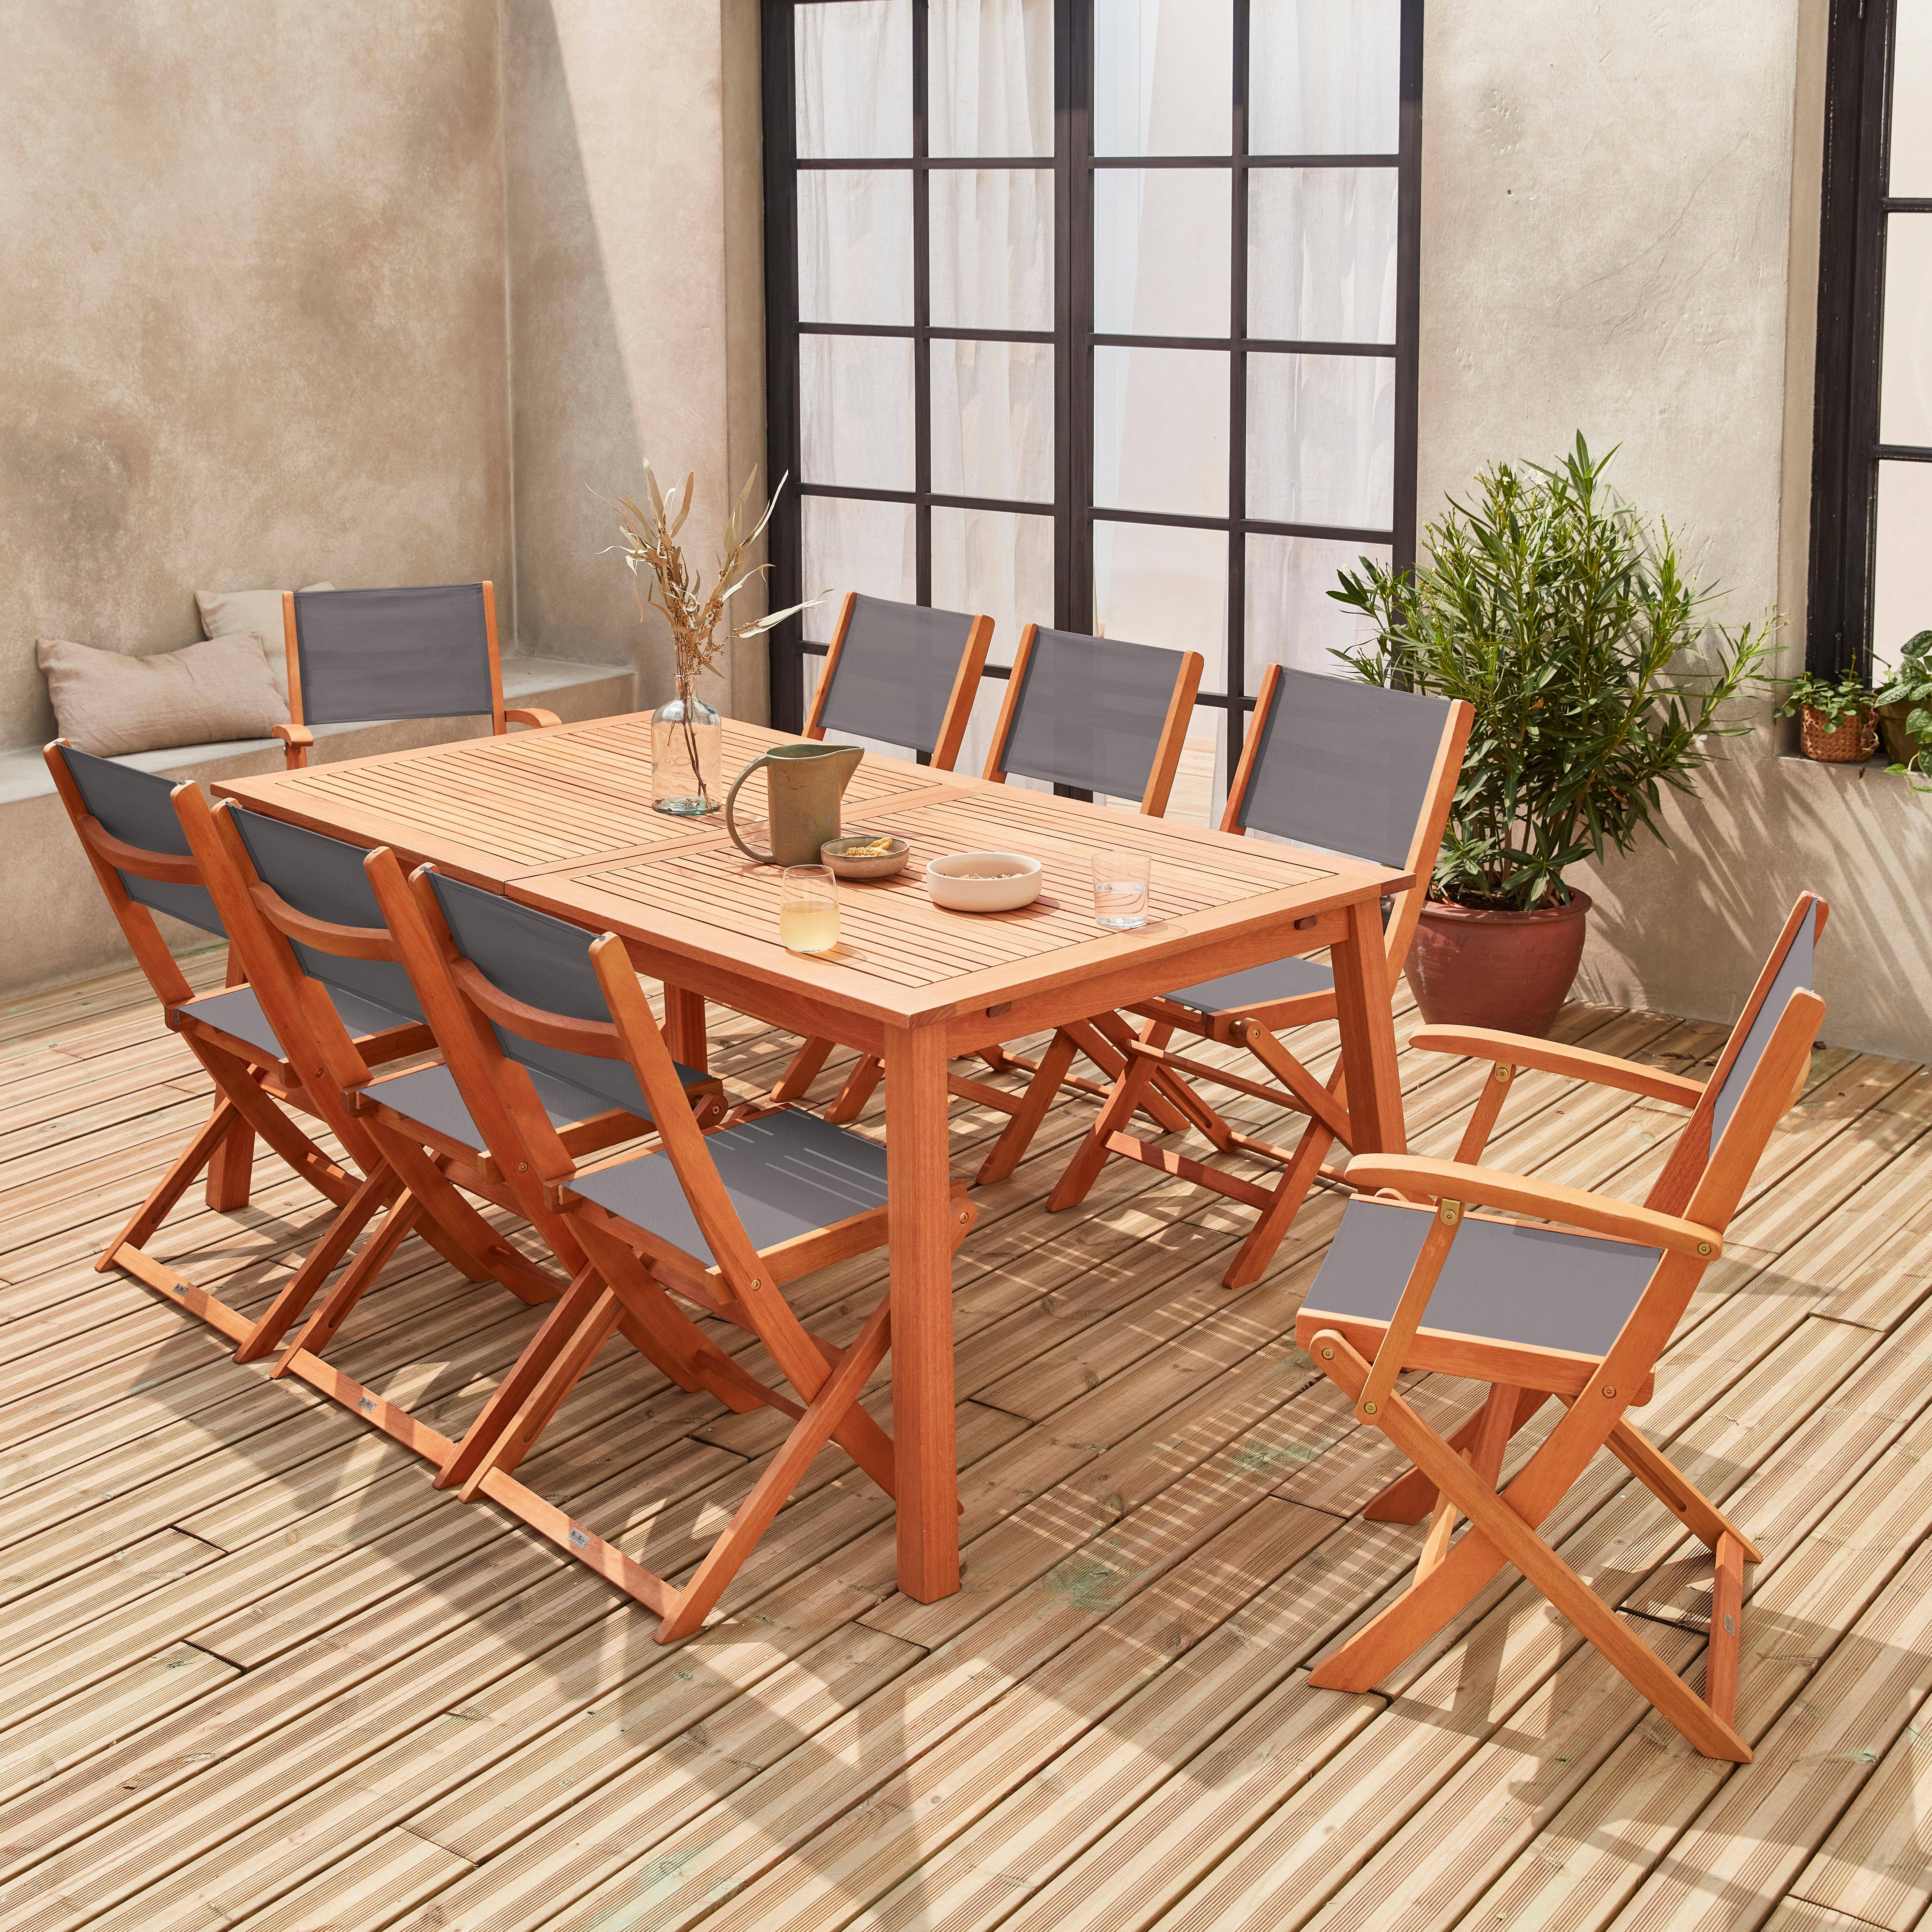 8-seater garden dining set, extendable 180-240cm FSC-eucalyptus wooden table, 6 chairs and 2 armchairs - Almeria 8 - Anthracite textilene seats,sweeek,Photo2